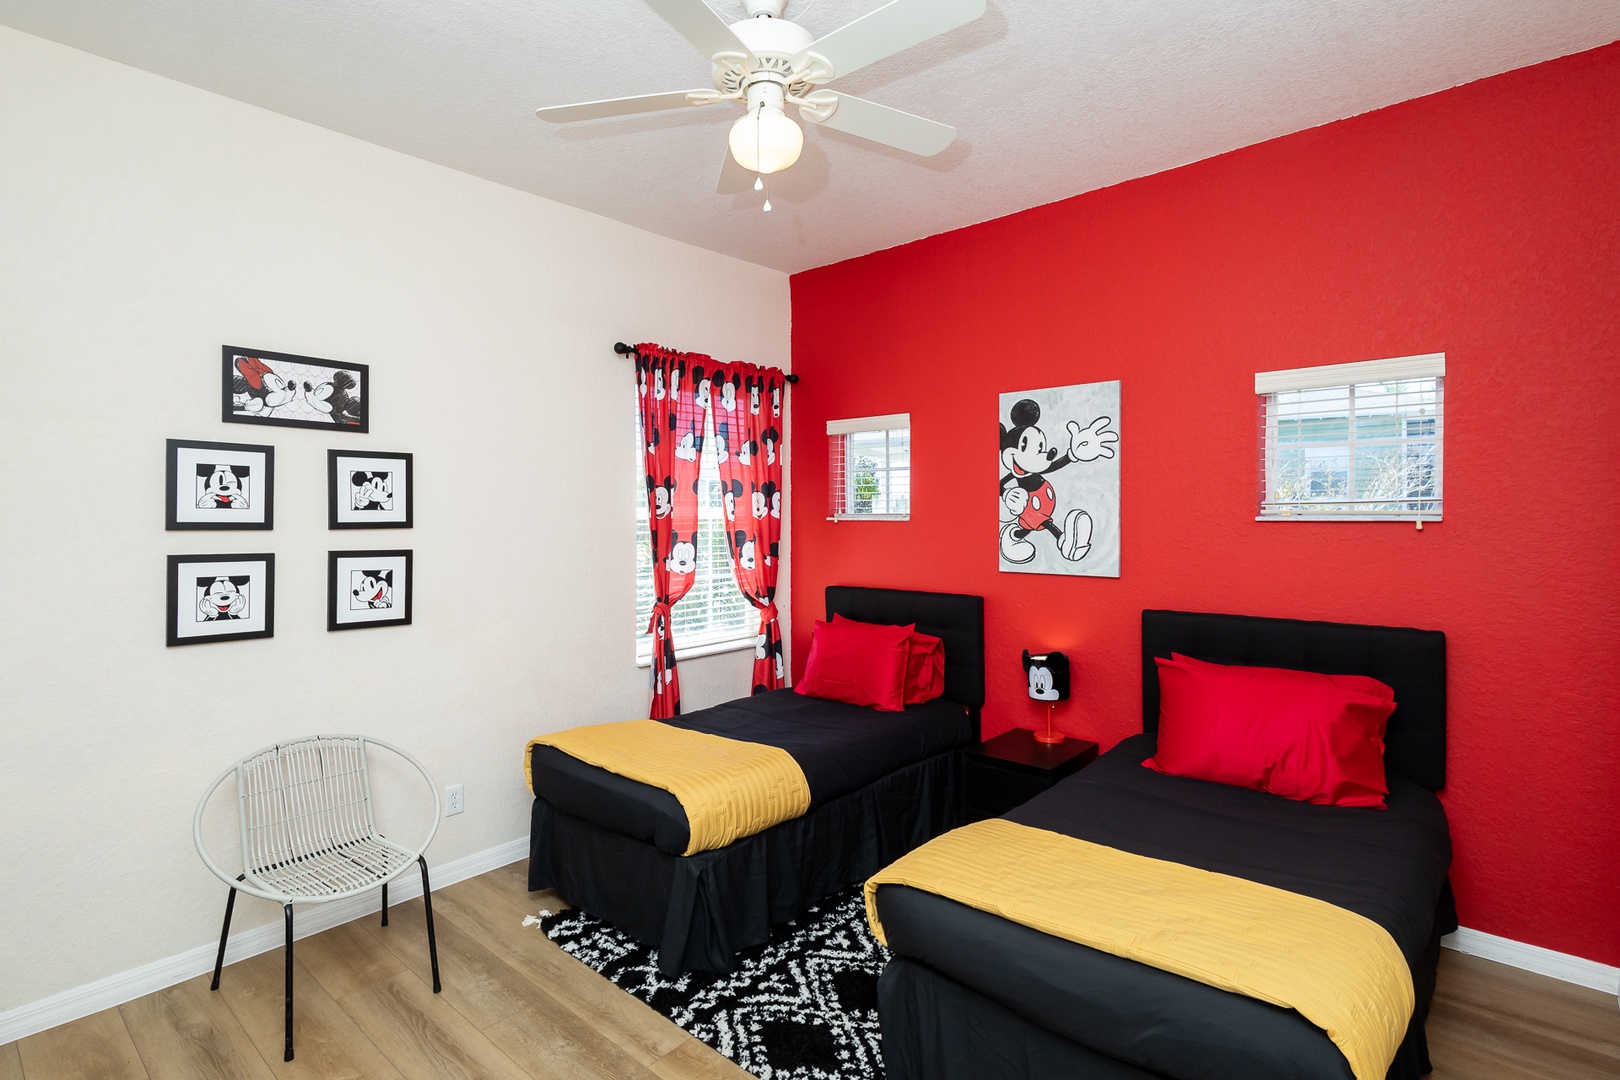 Double the fun in the Mickey-themed bedroom, with twin beds & Smart TV magic!